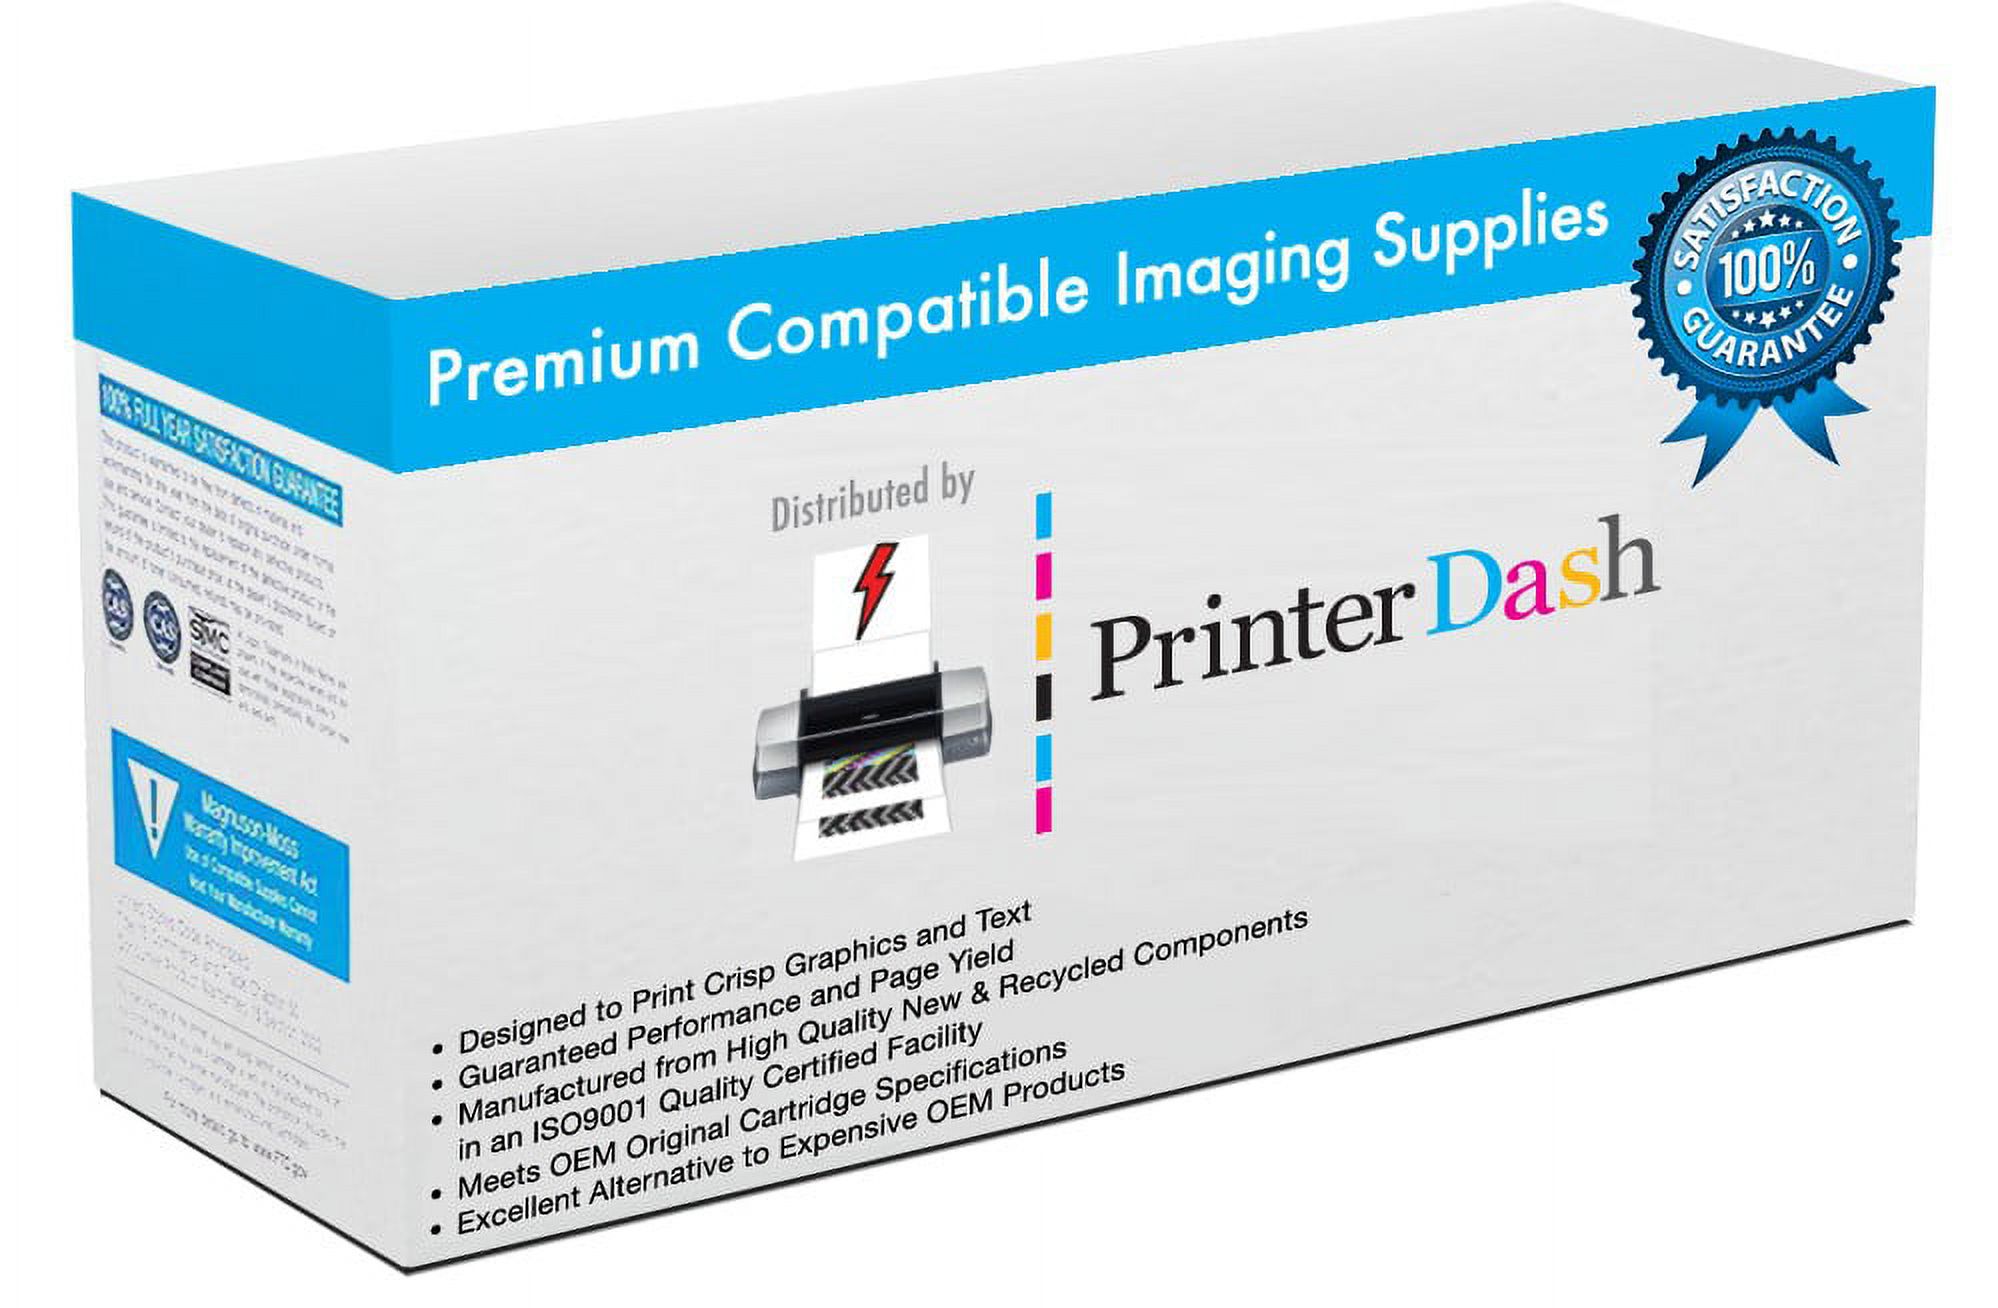 PrinterDash Replacement for PIXMA MP-150/160/450/MX-300/310/318 Inkjet Combo Pack (Black/Color) (PG-50/CL-51) (0616B001/0618B001MP) - image 2 of 8